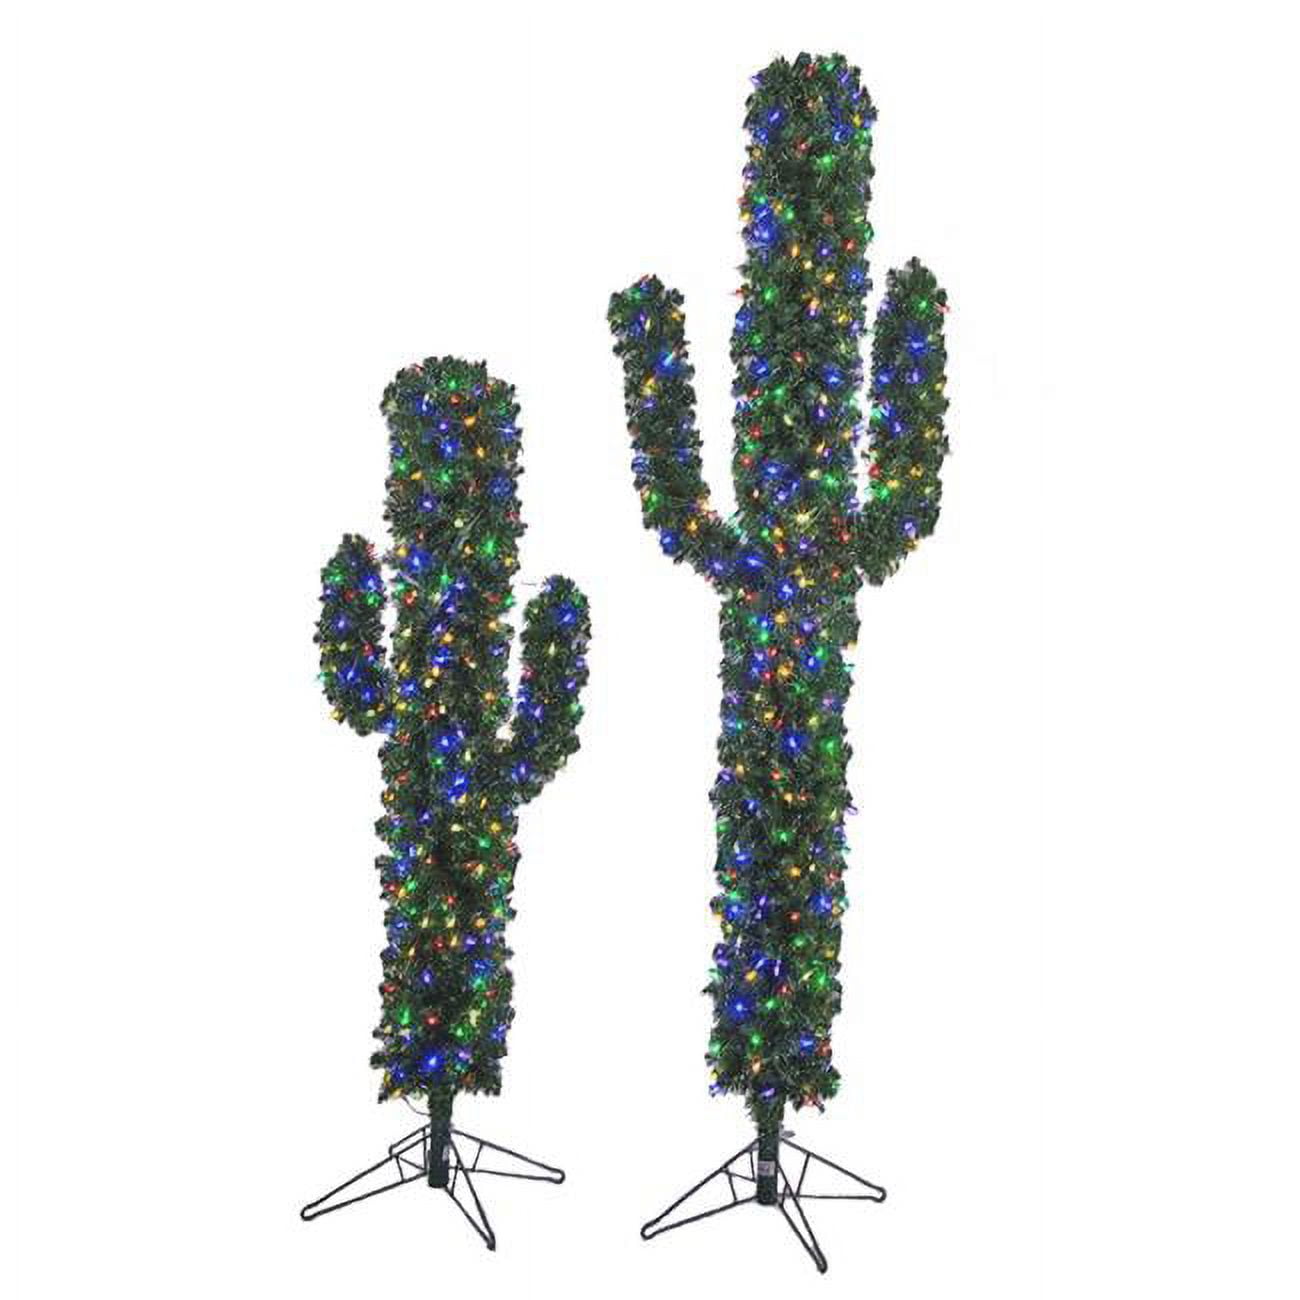 Picture of Autograph Foliages C-183000 5.5 ft. PVC Holiday Cactus Trees, Green